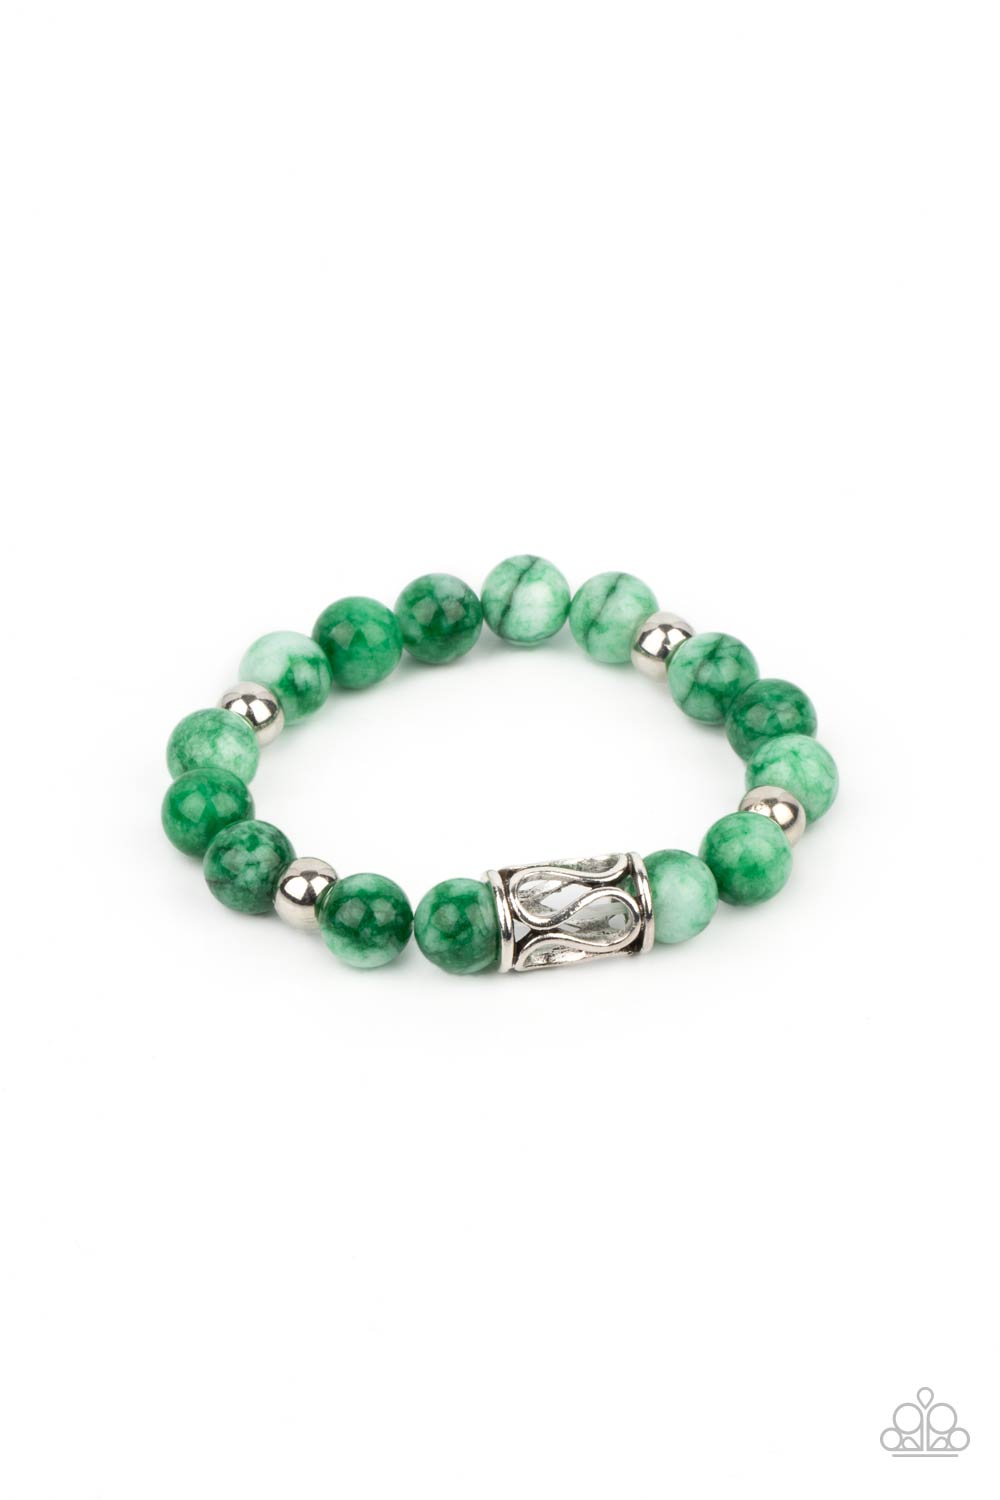 Soothes the Soul - Green Urban Bracelets infused with an ornate silver centerpiece, an earthy collection of silver and jade beads are threaded along a stretchy band around the wrist for a seasonal flair.  Sold as one individual bracelet.  Paparazzi Jewelry is lead and nickel free so it's perfect for sensitive skin too!